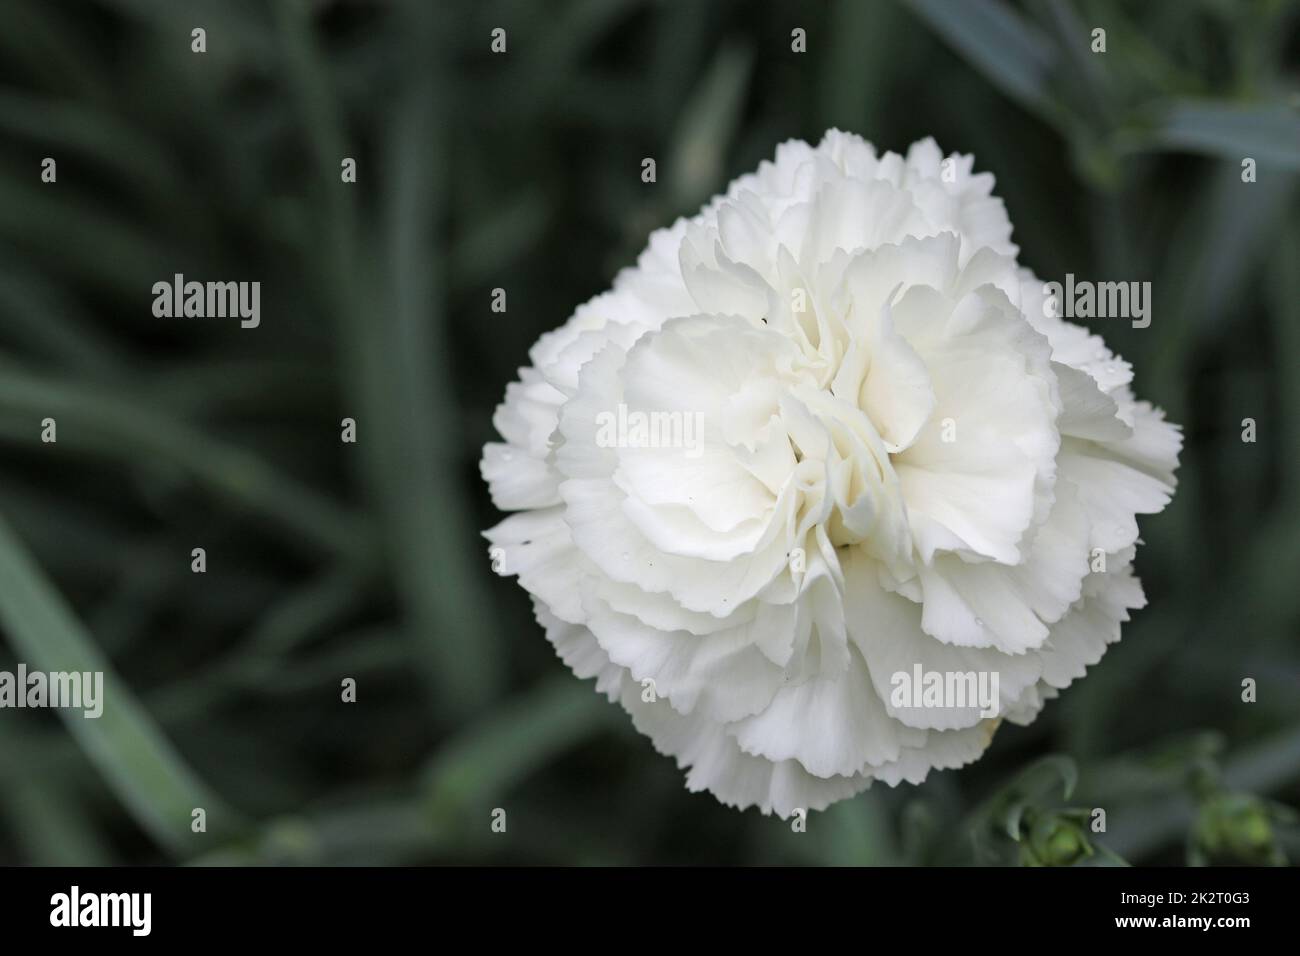 White Dianthus flower in close up Stock Photo